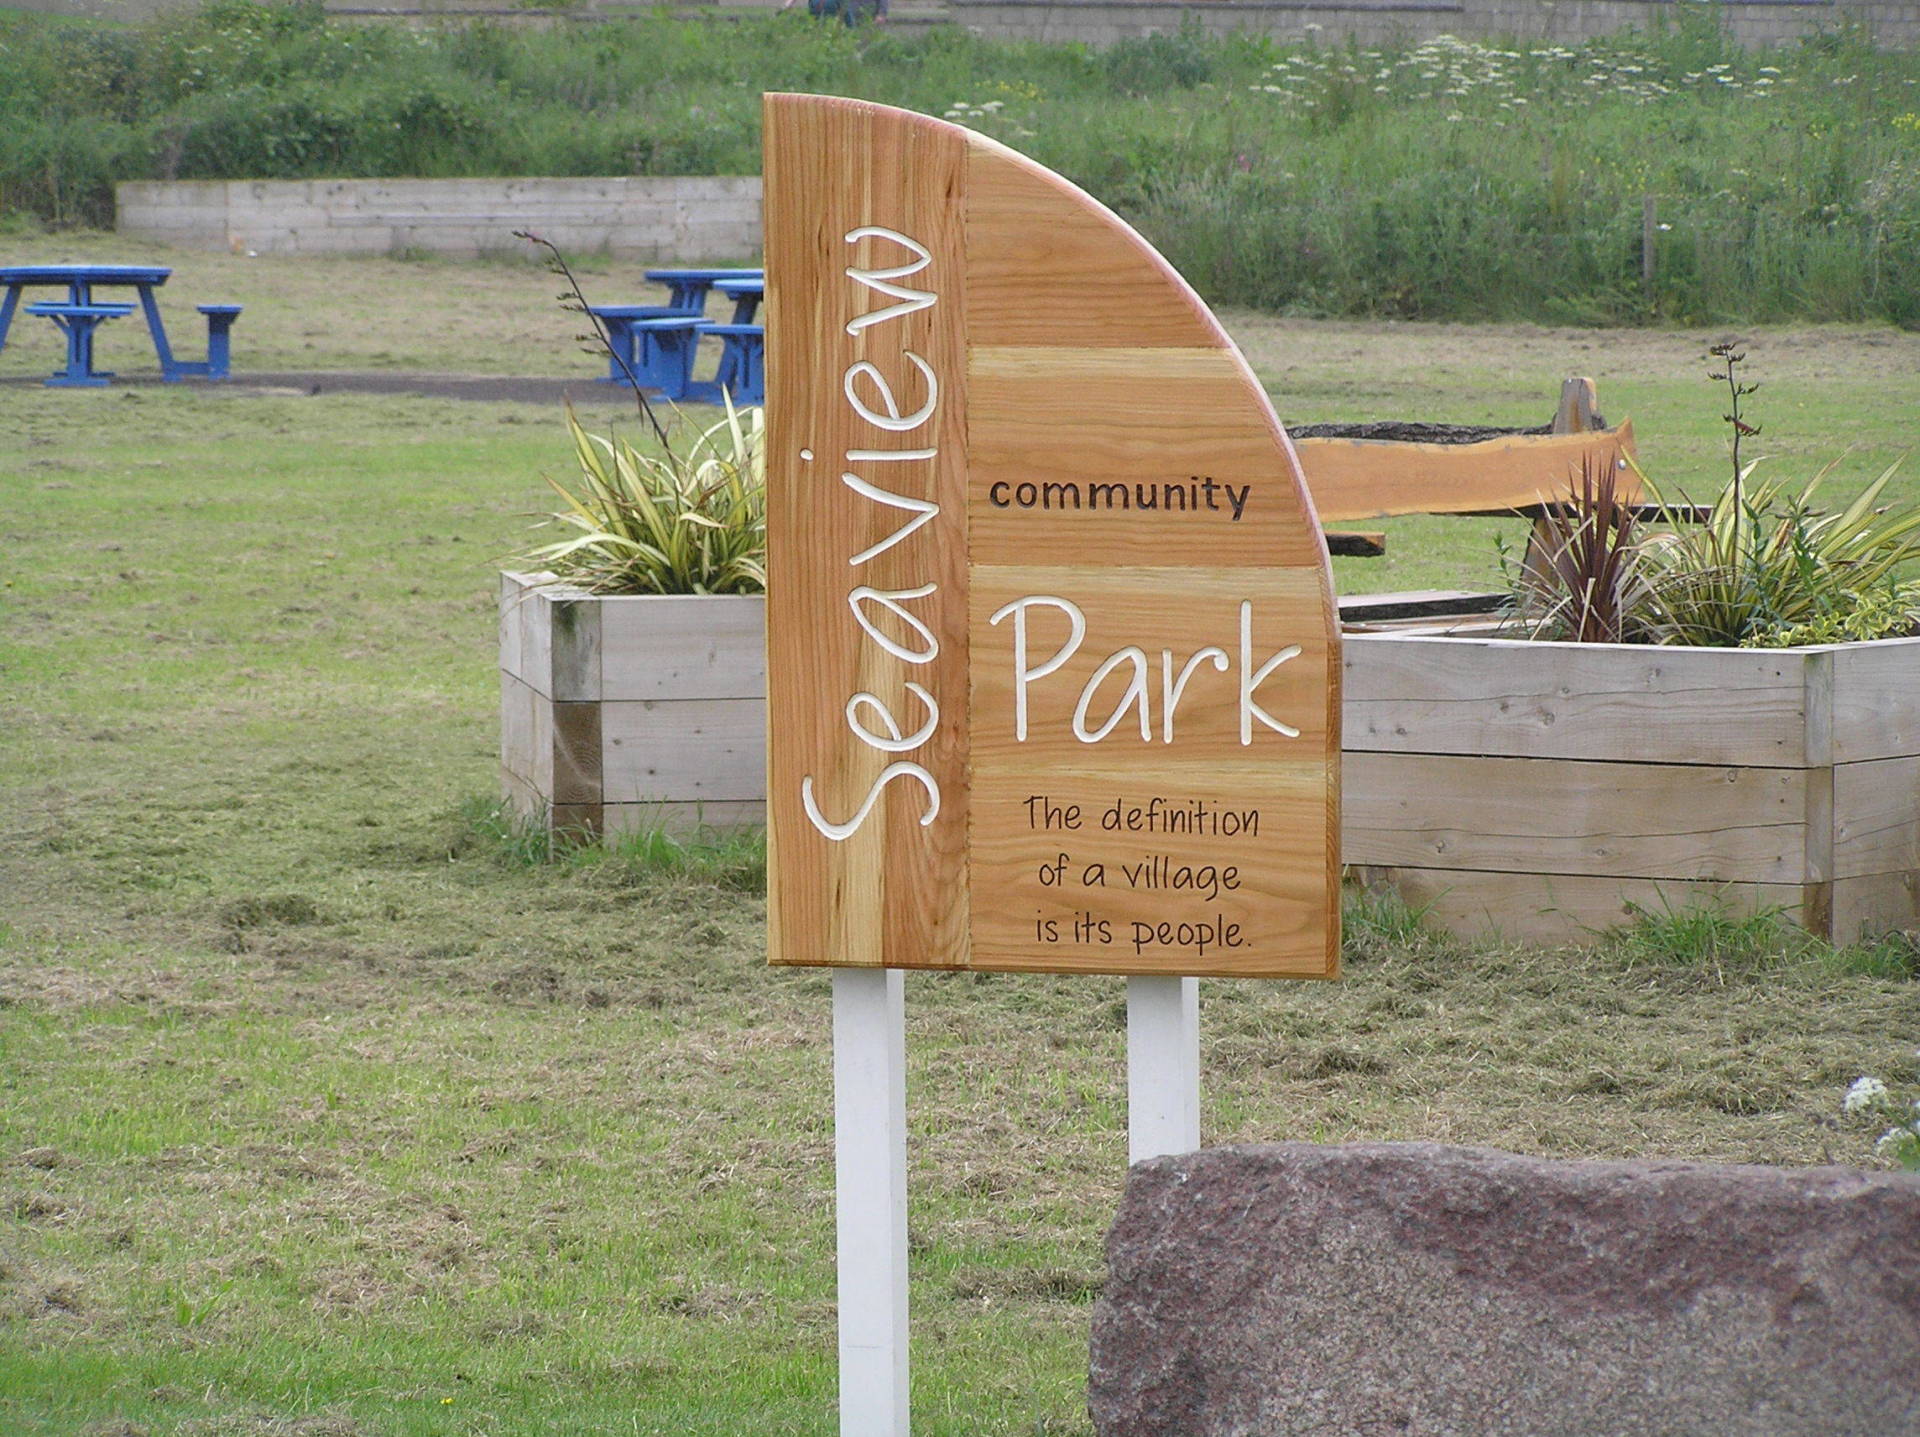 Wooden Eco-friendly community sign by Ingrained Culture.